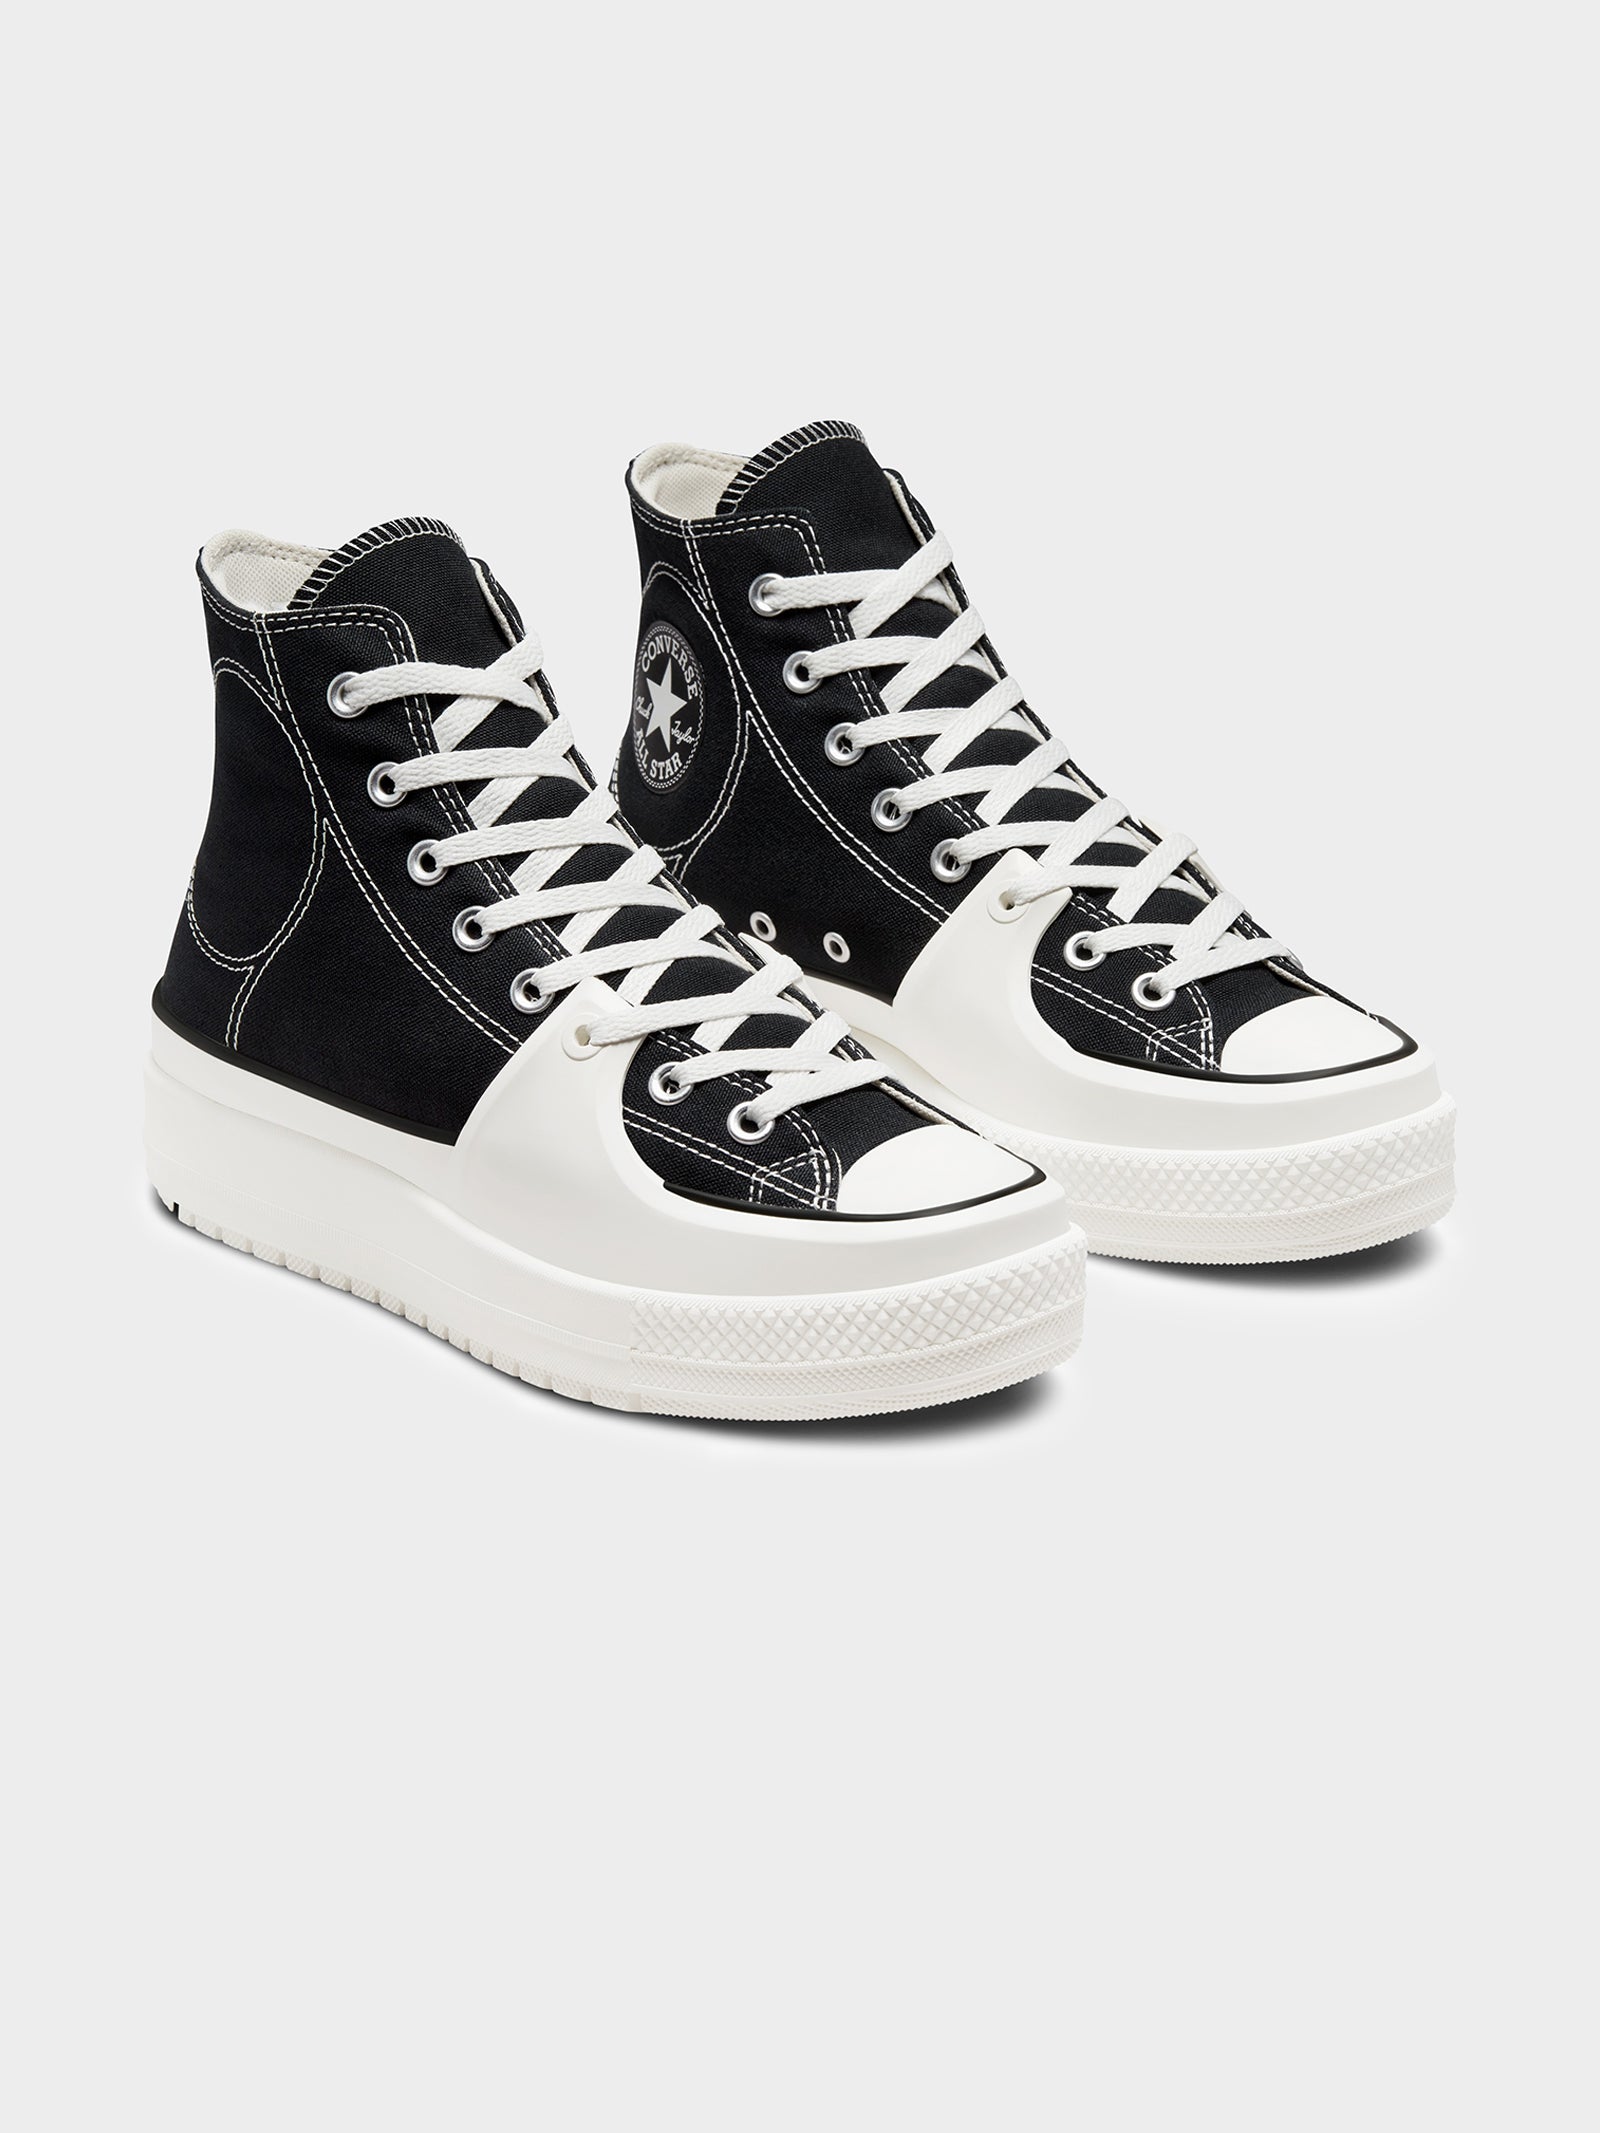 Womens Chuck Taylor All Star Construct Deco Stitch High Top Sneakers in Black